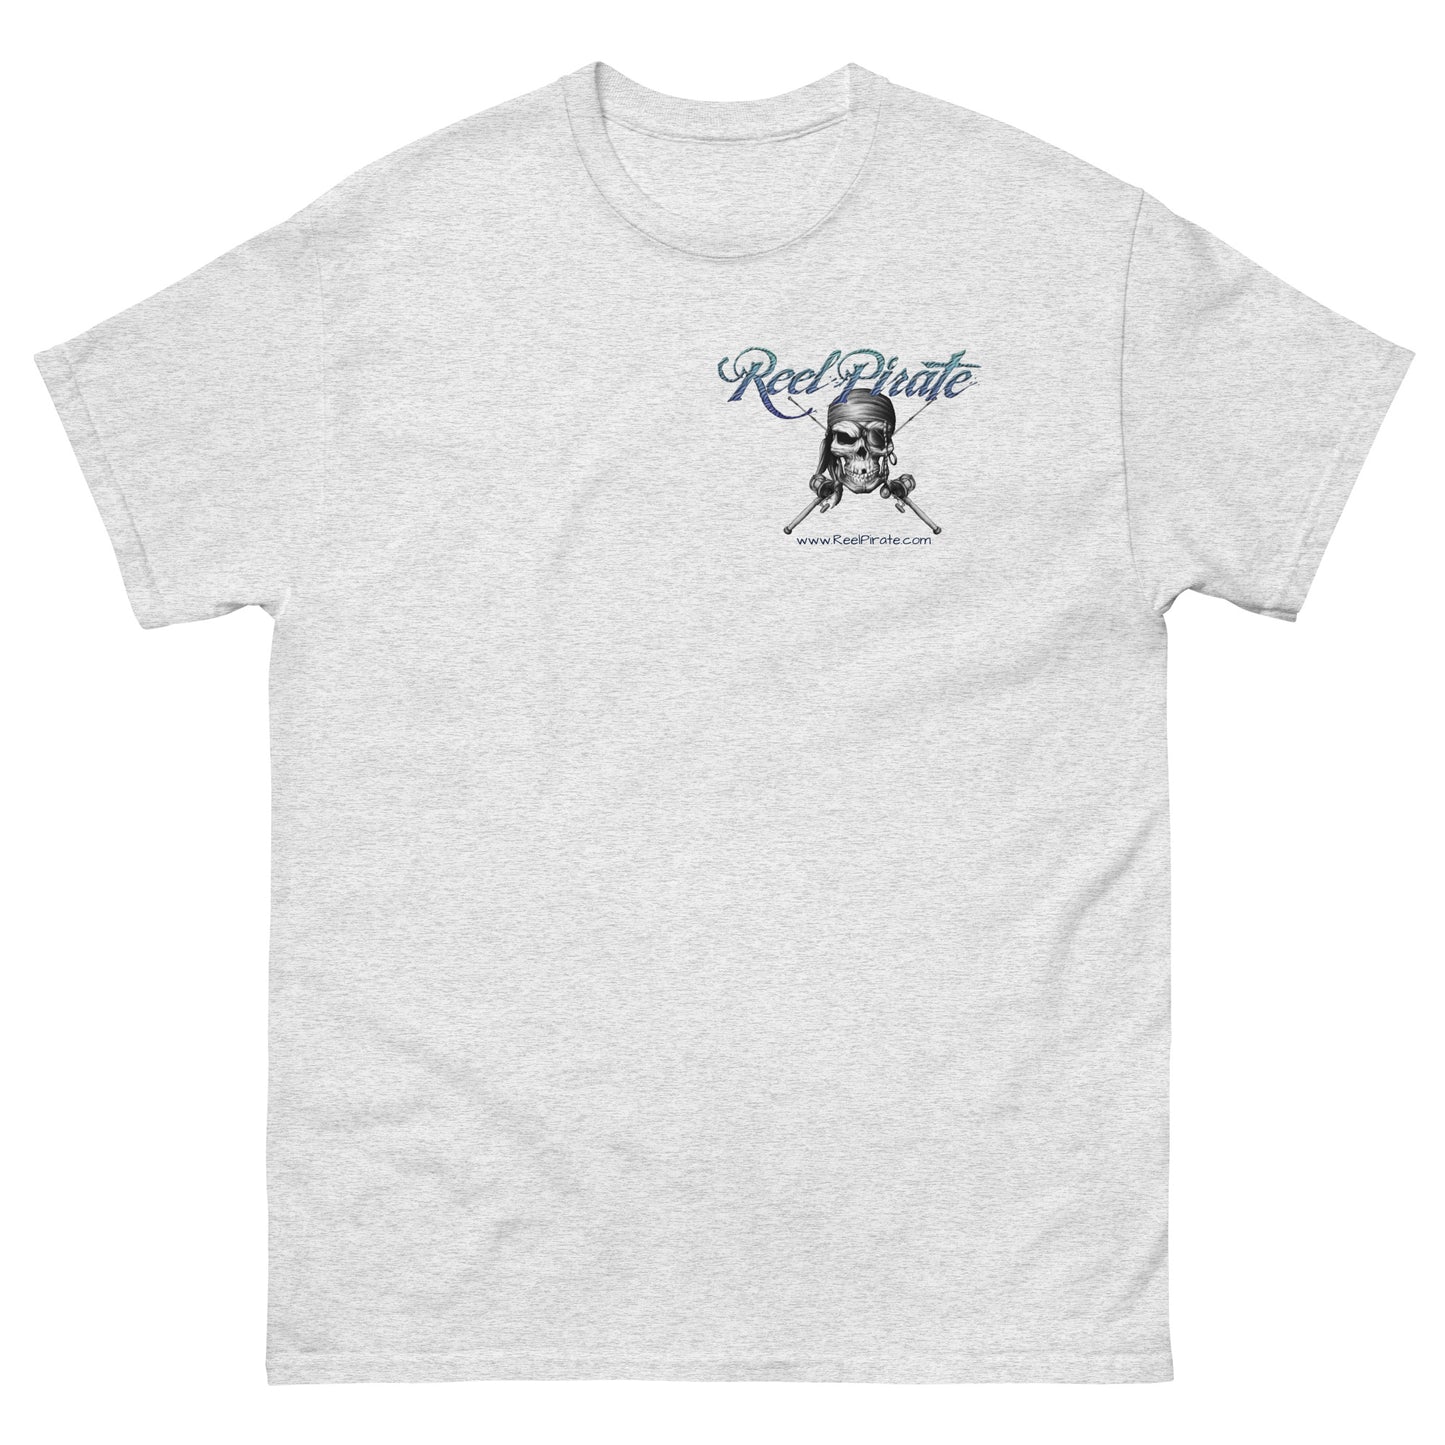 Men's REELPIRATE MACK ATTACK on back  classic tee